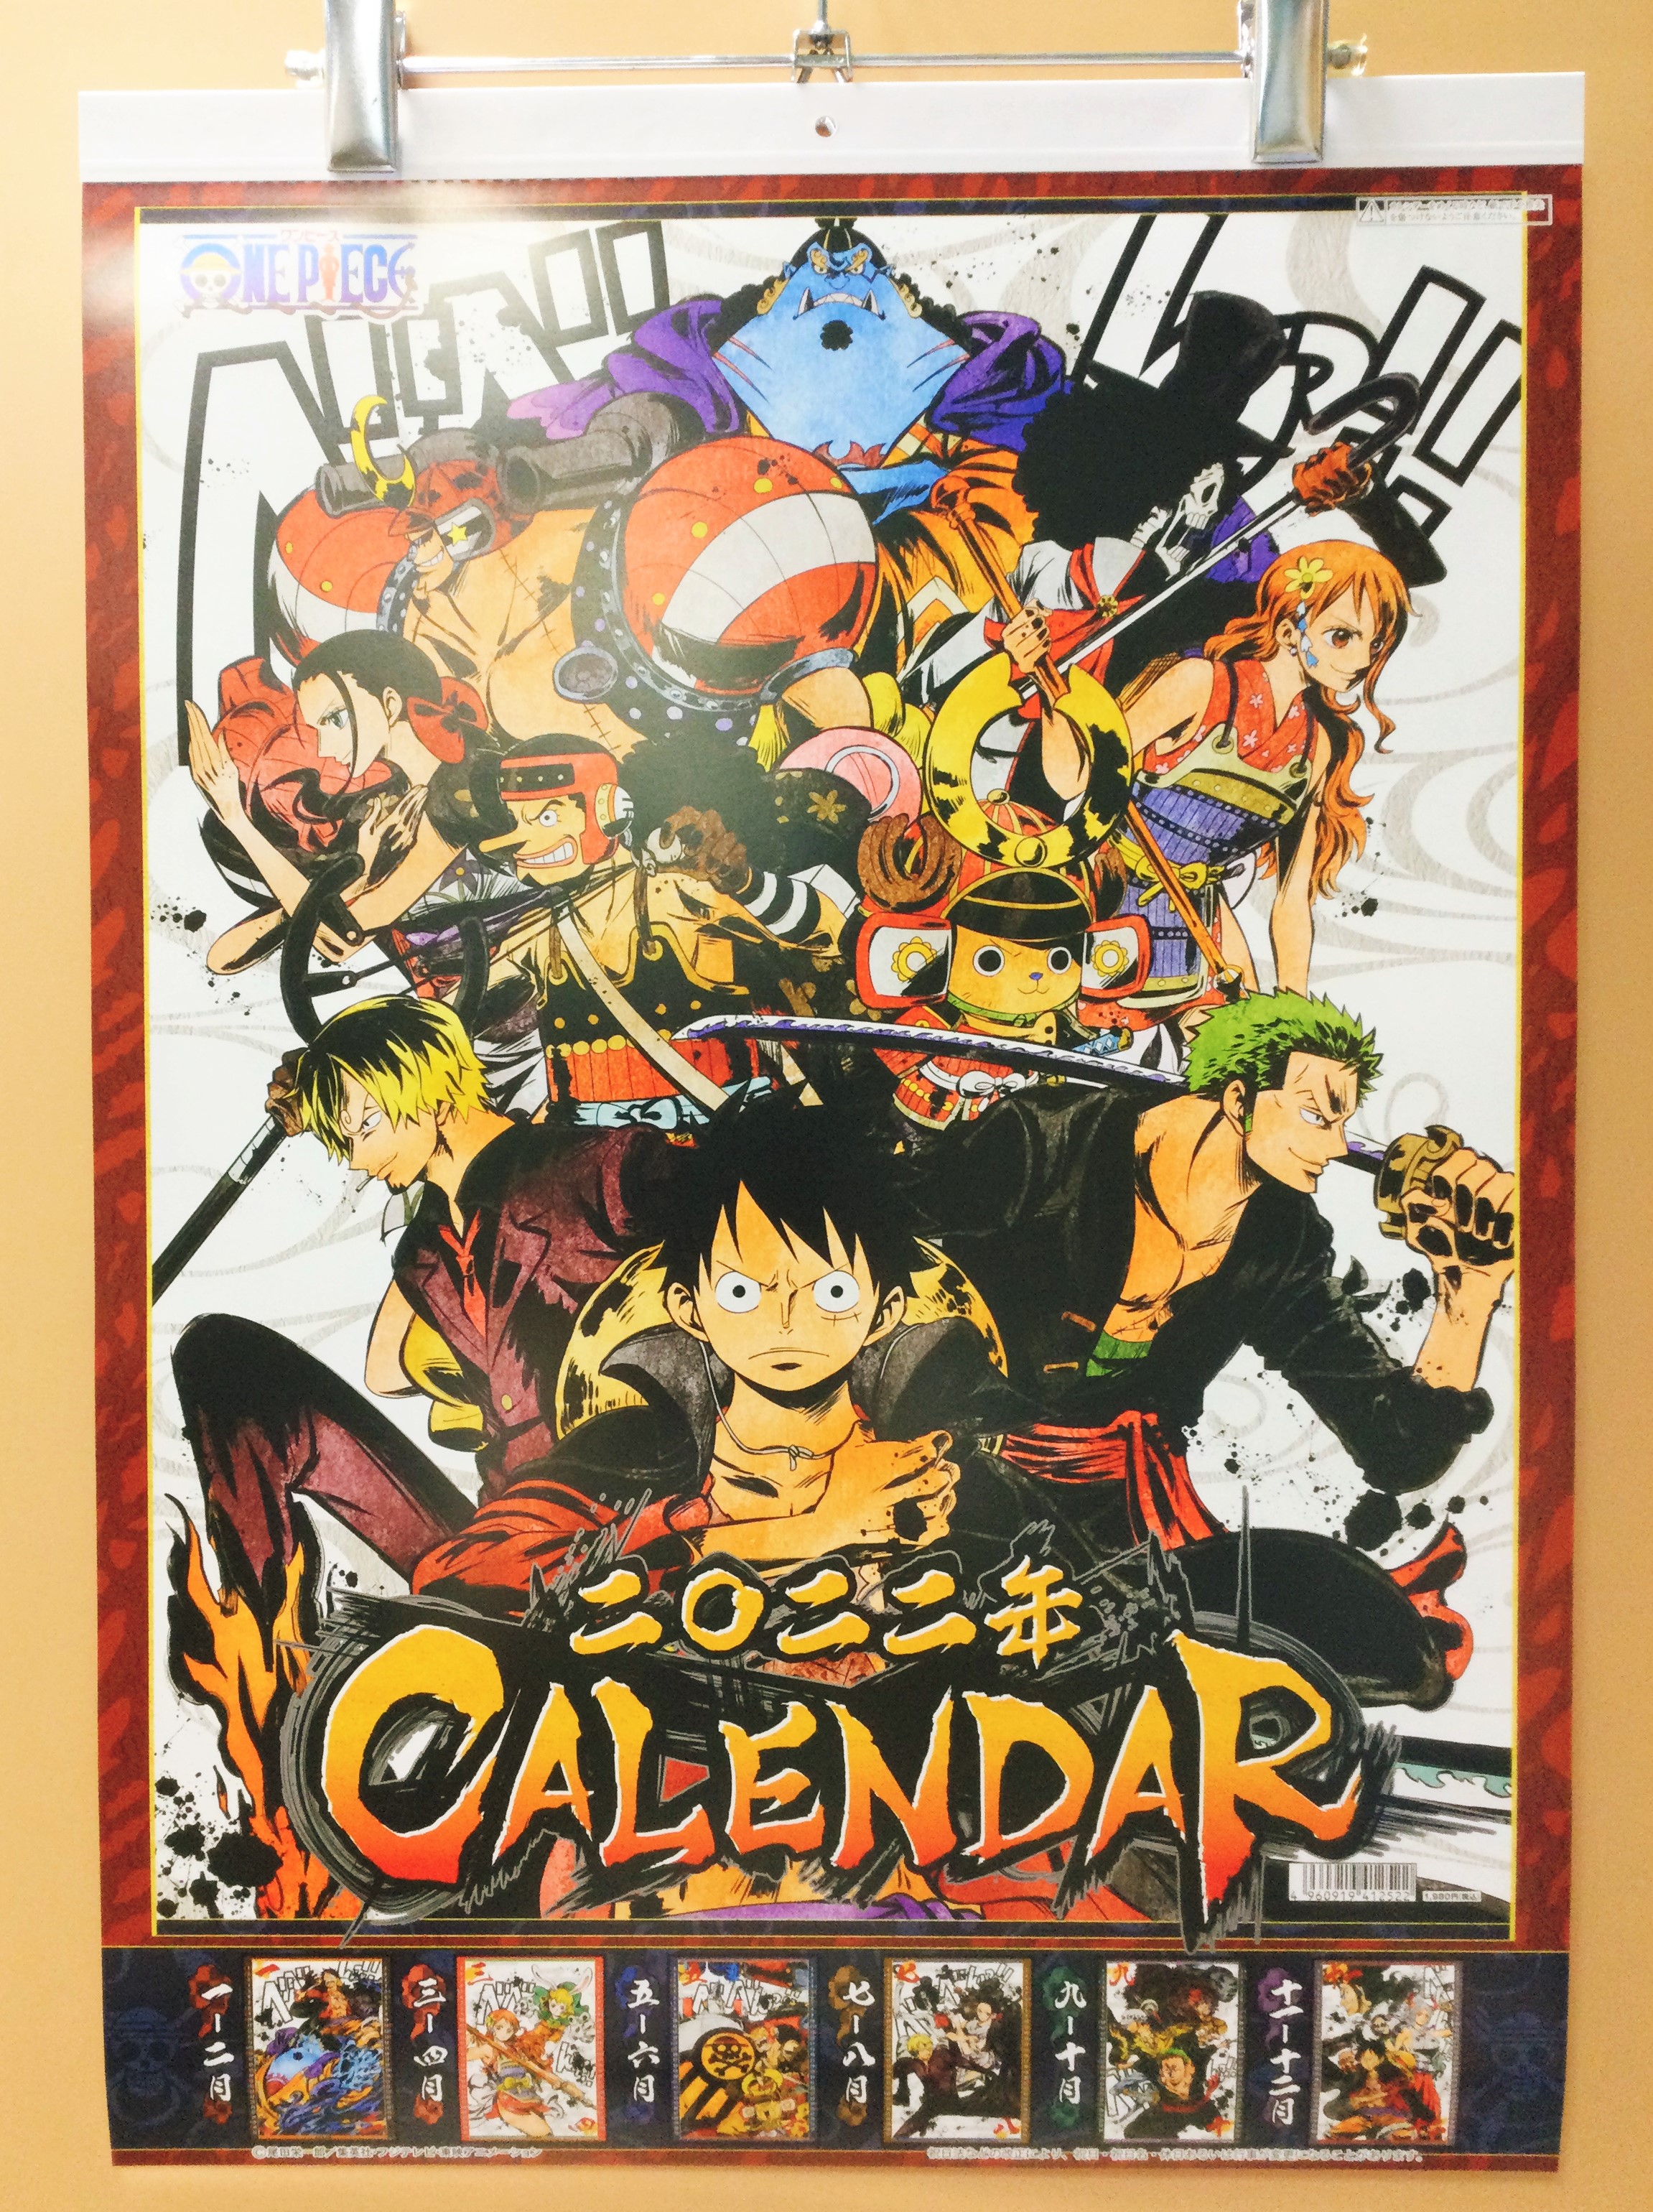 One Piece 麦わらストア名古屋店 A Twitter 22ワンピースa2カレンダー 1 980円 税込 本日 再入荷致しました 麦わらストア Onepiece T Co Chxoeqvswl Twitter